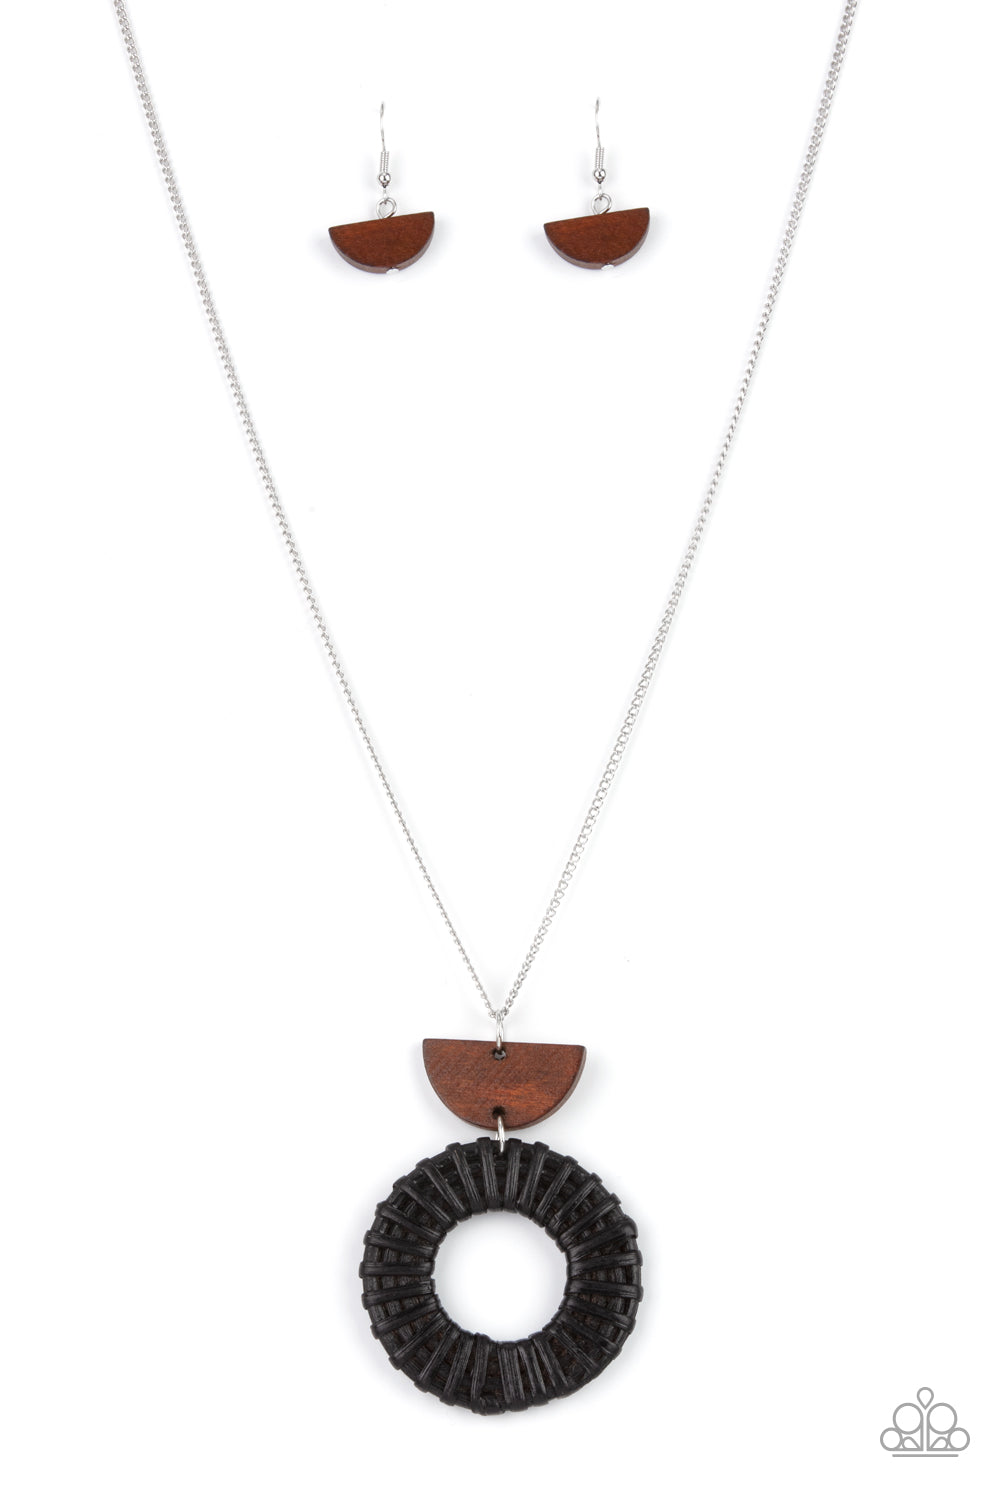 Homespun Stylist - Black Wicker with Wood Necklace - Paparazzi Accessories